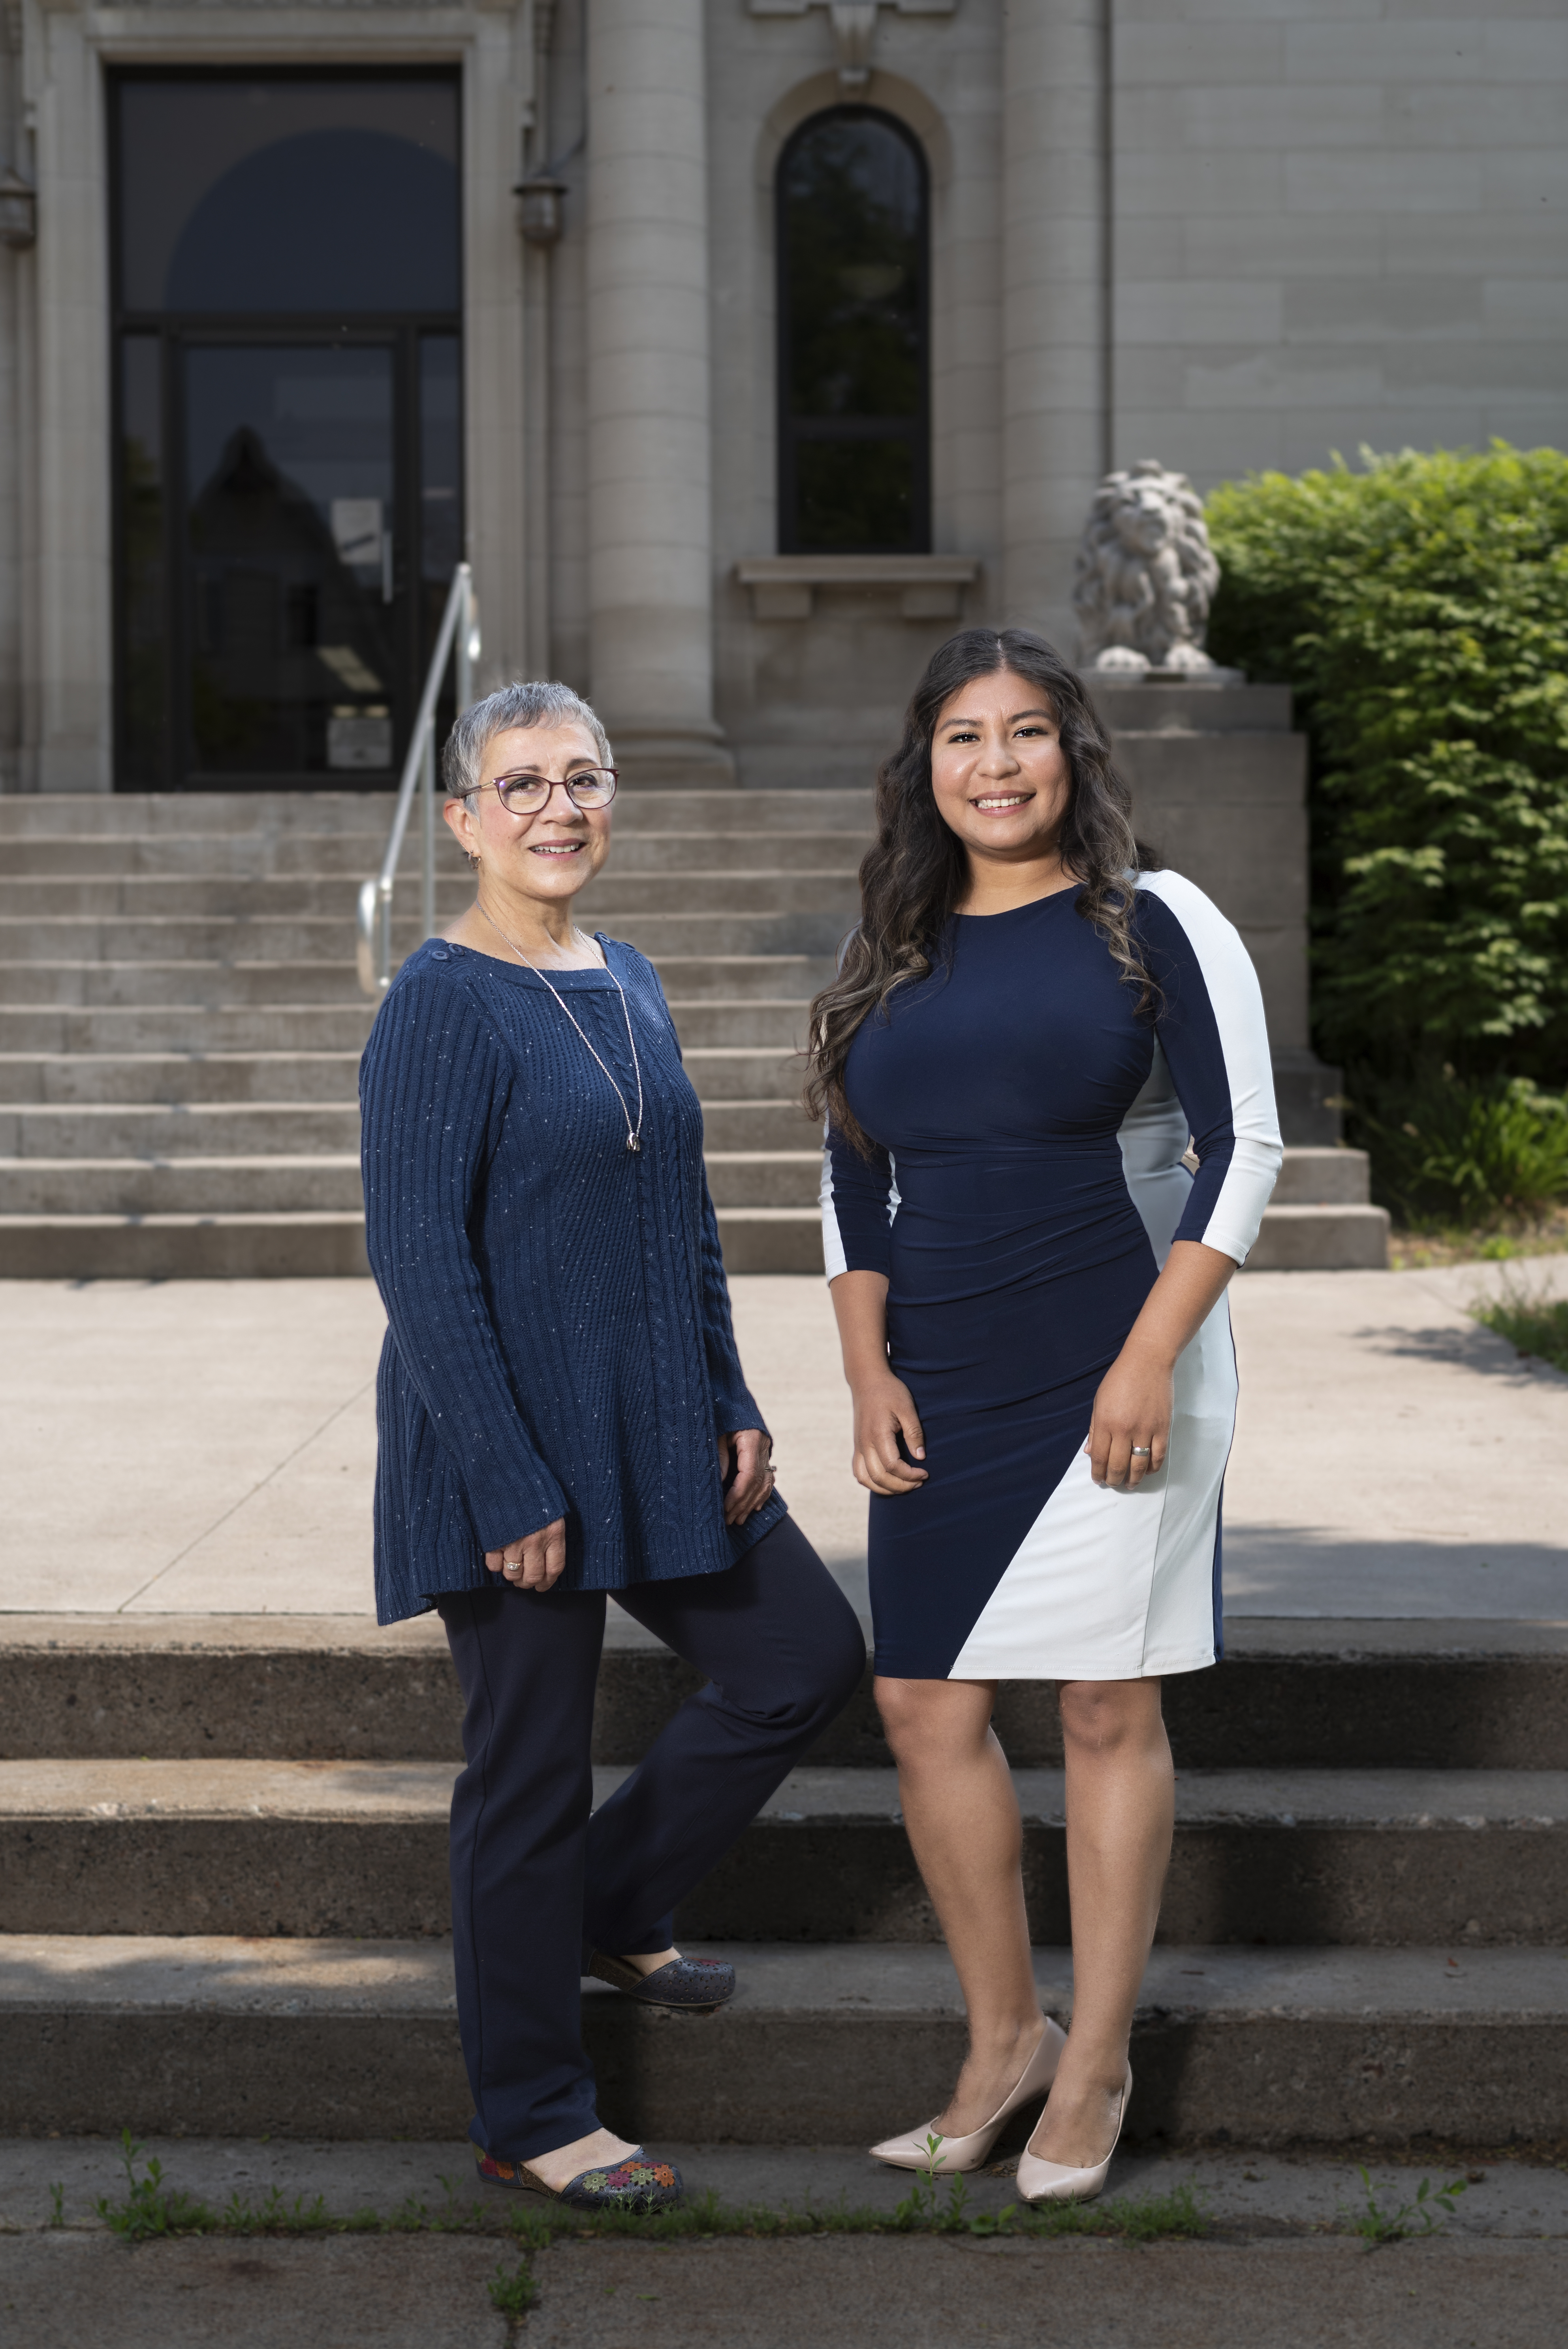 Raquel Fernandez‑Earns (left) and Cinthia Mendoza‑Medina (right) smile standing side by side. 